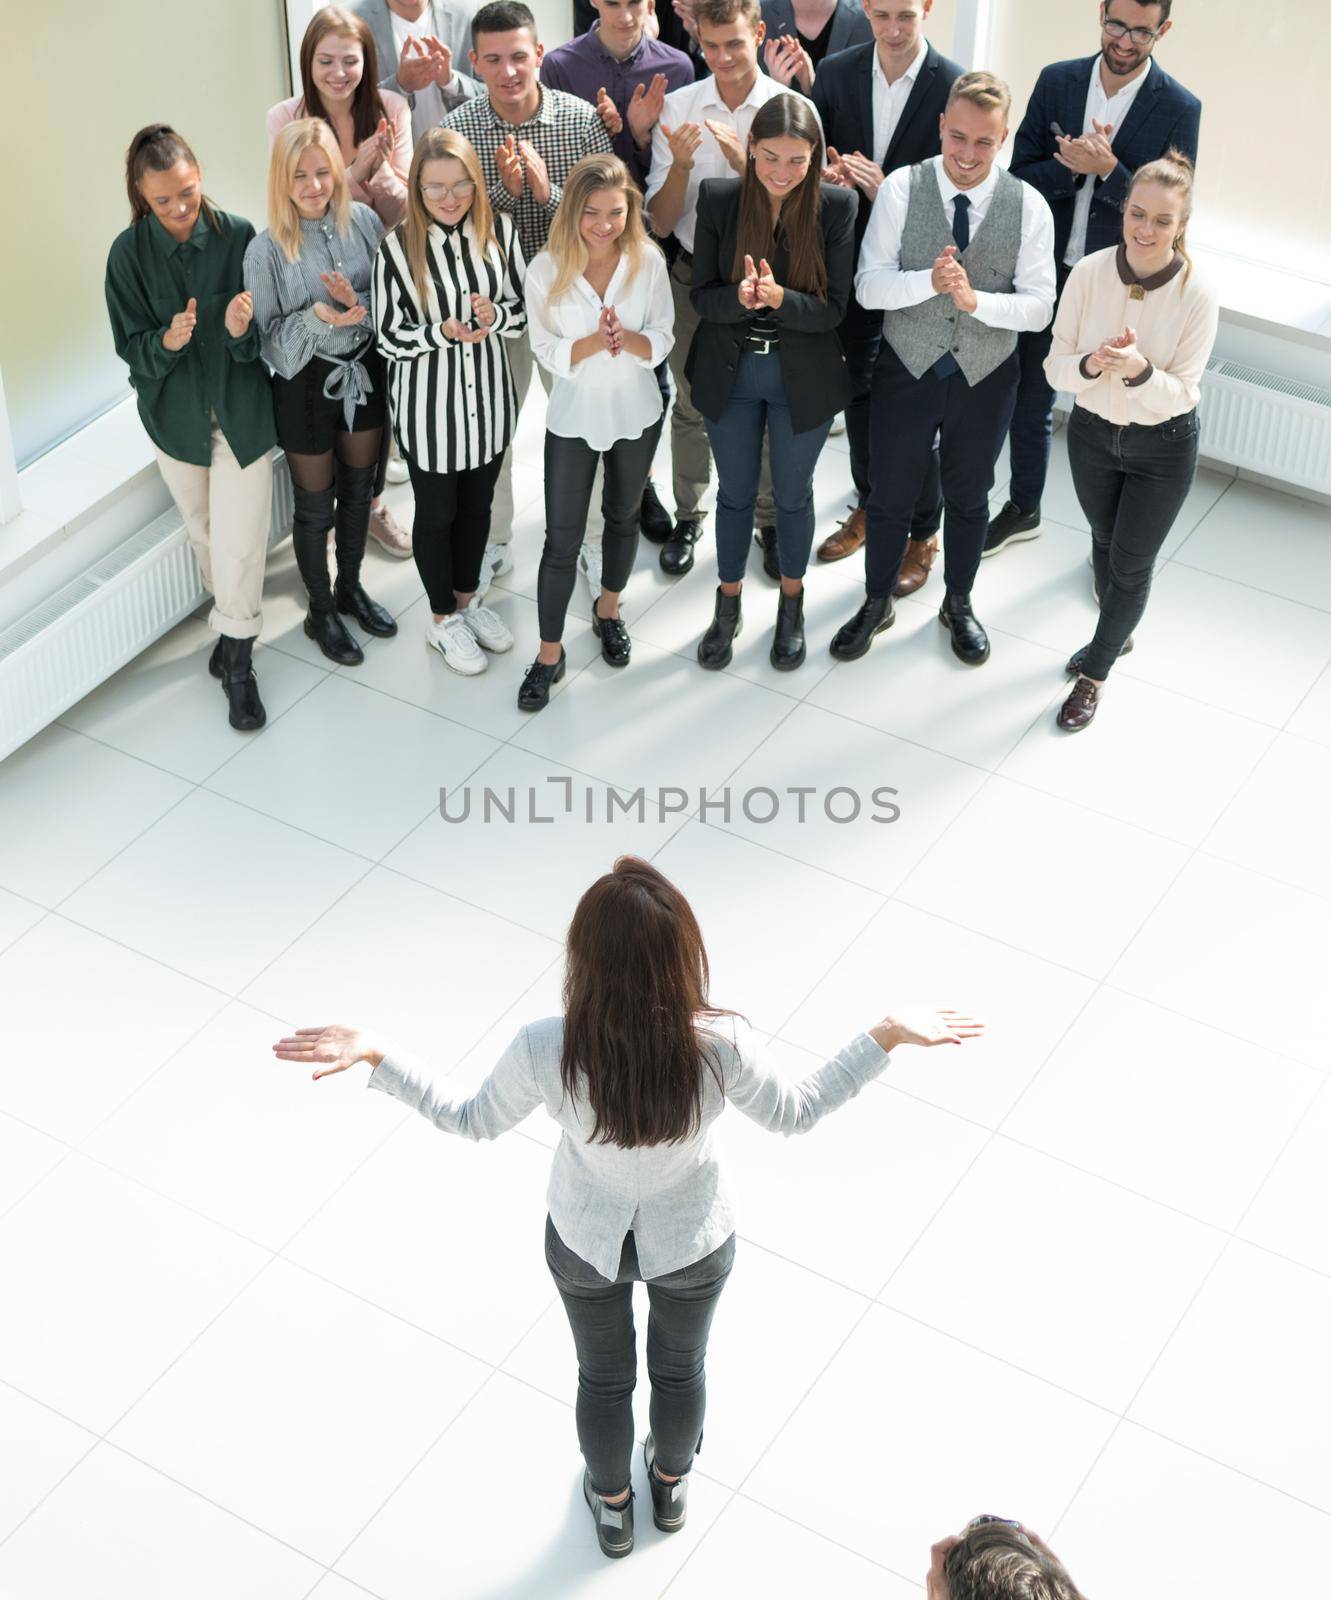 top view. female leader standing at the front of the business team . business concept